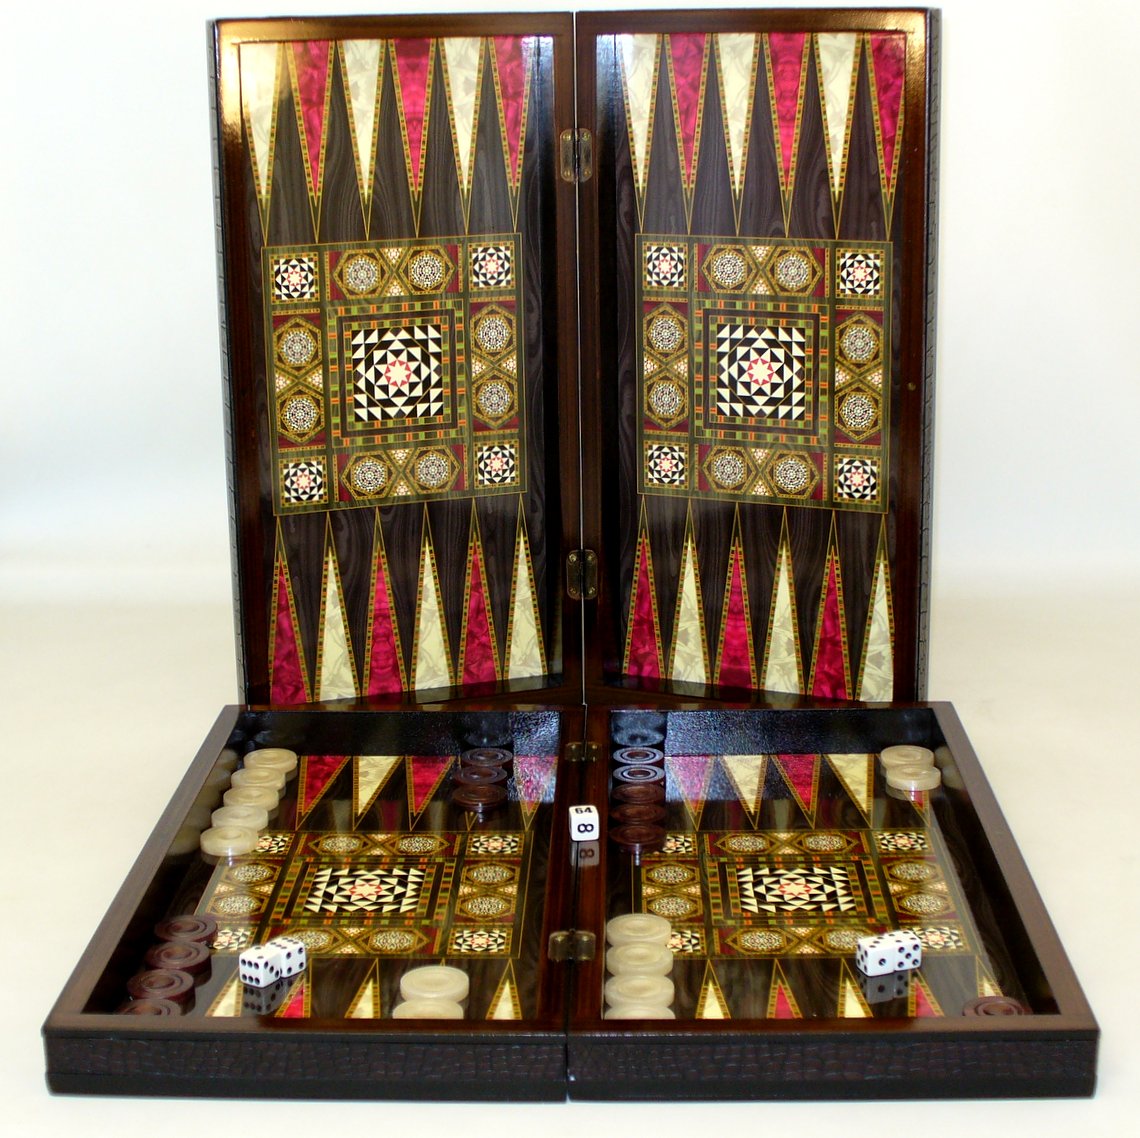 26201d 14.5 In. Pearl Mosaic With Chessboard - Decoupage Wood Backgammon